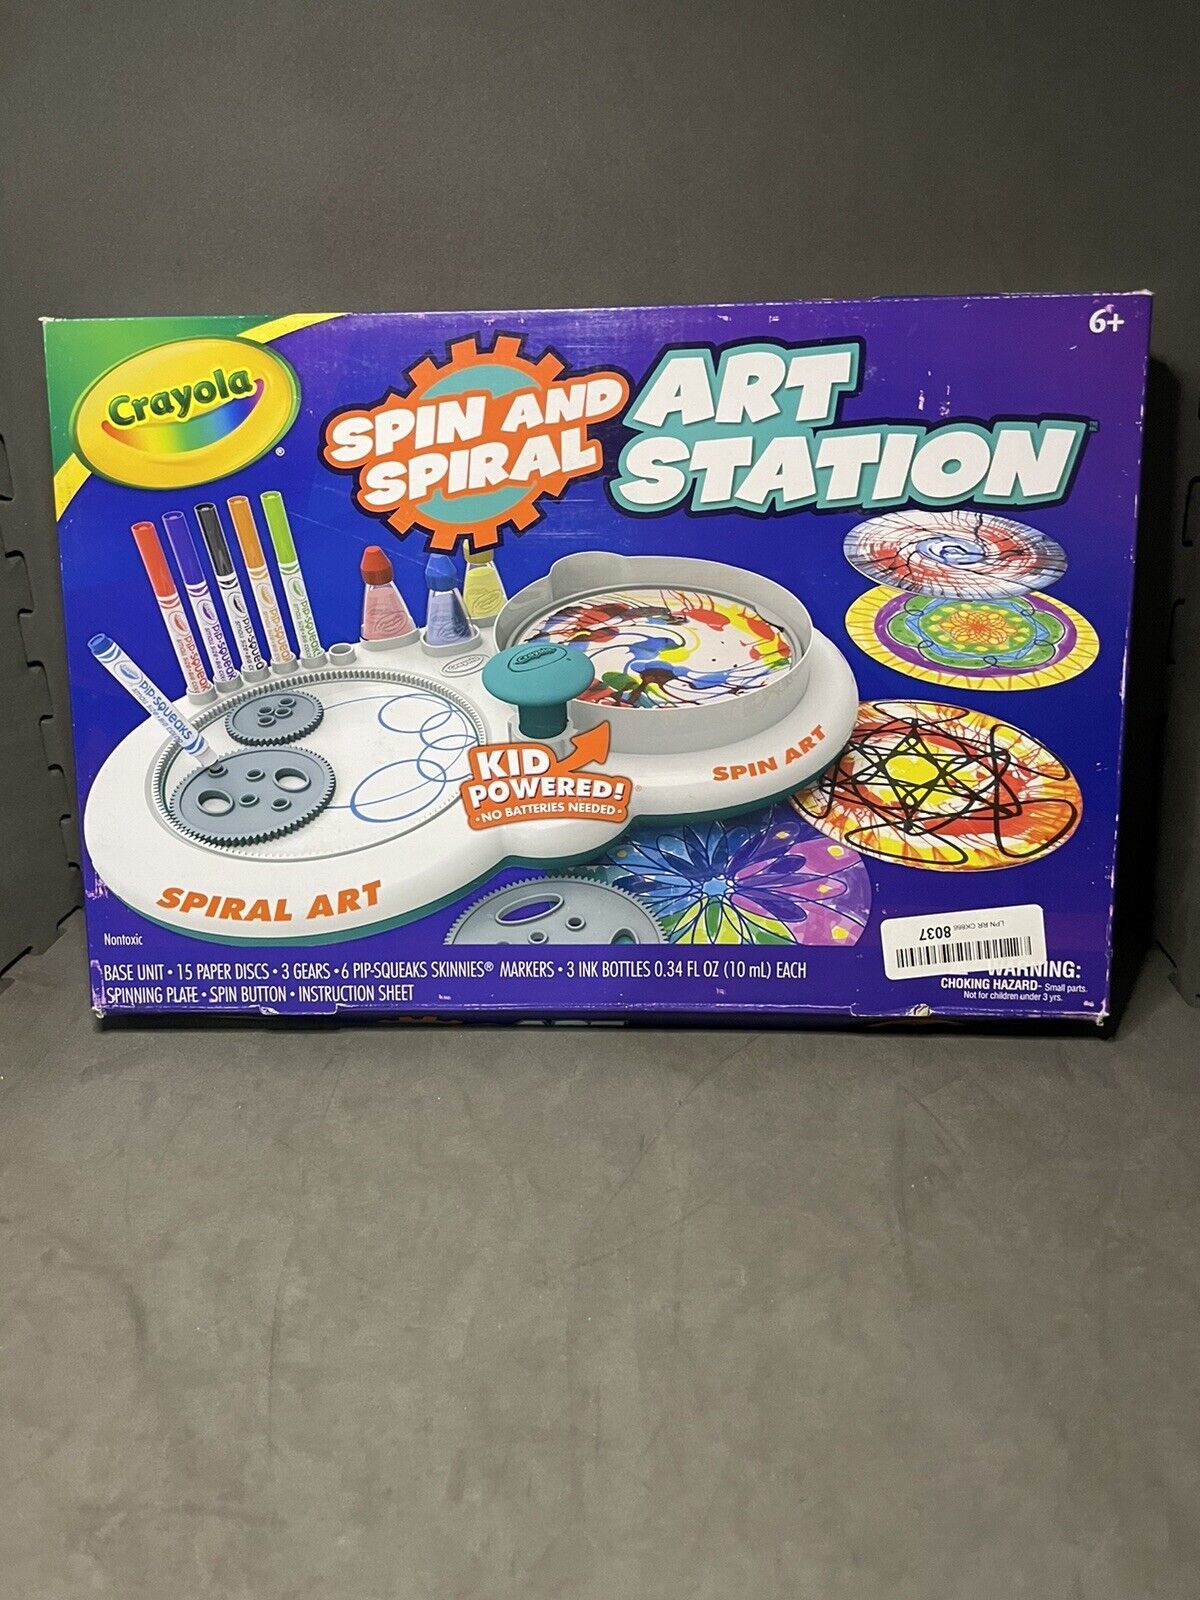 Primary image for Crayola Spin and Spiral Art Station, DIY Crafts for Kids New